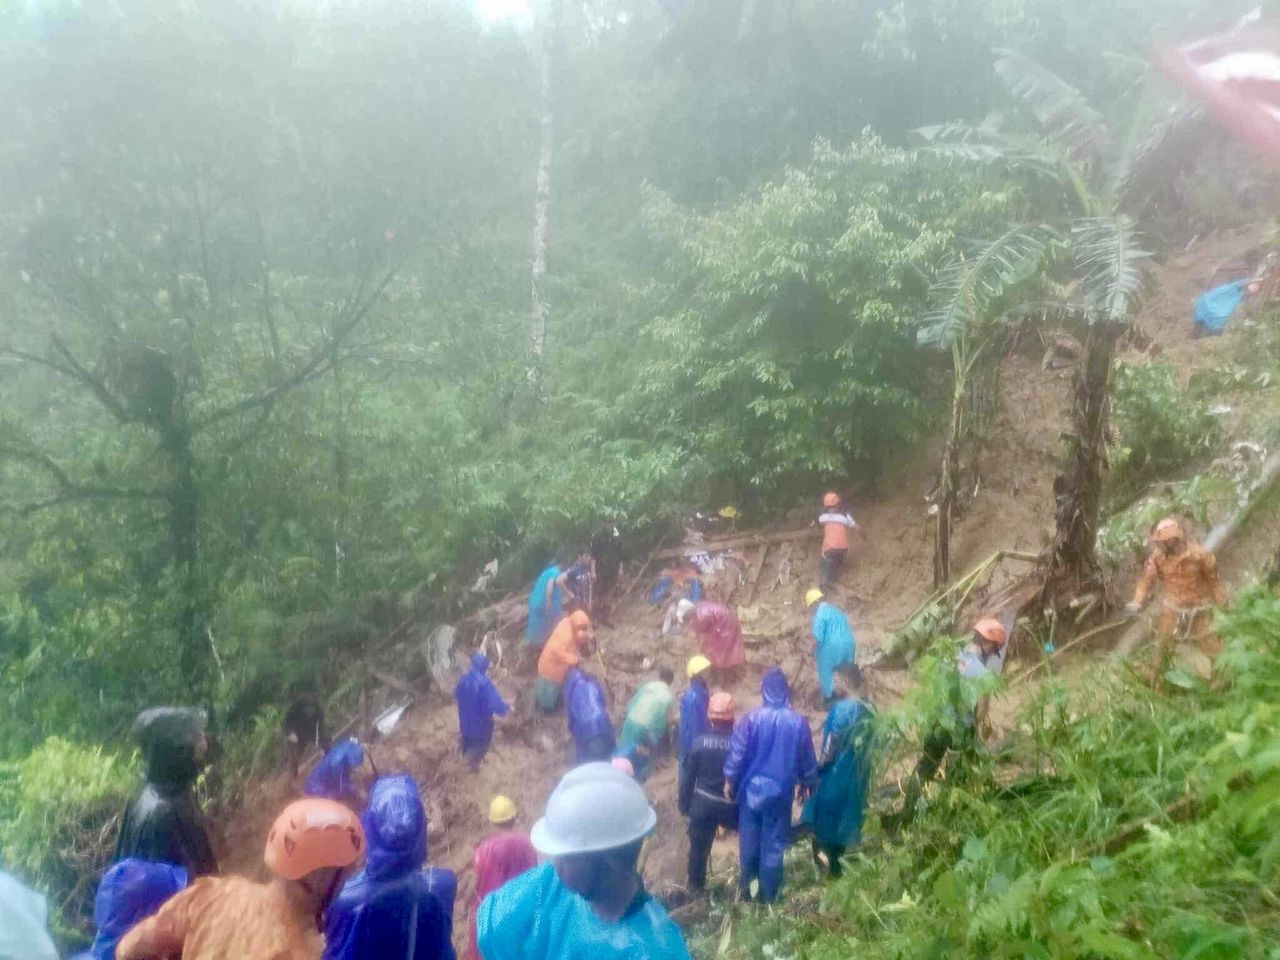 Nature's fury strikes again: 10 dead in Philippine landslide tragedy